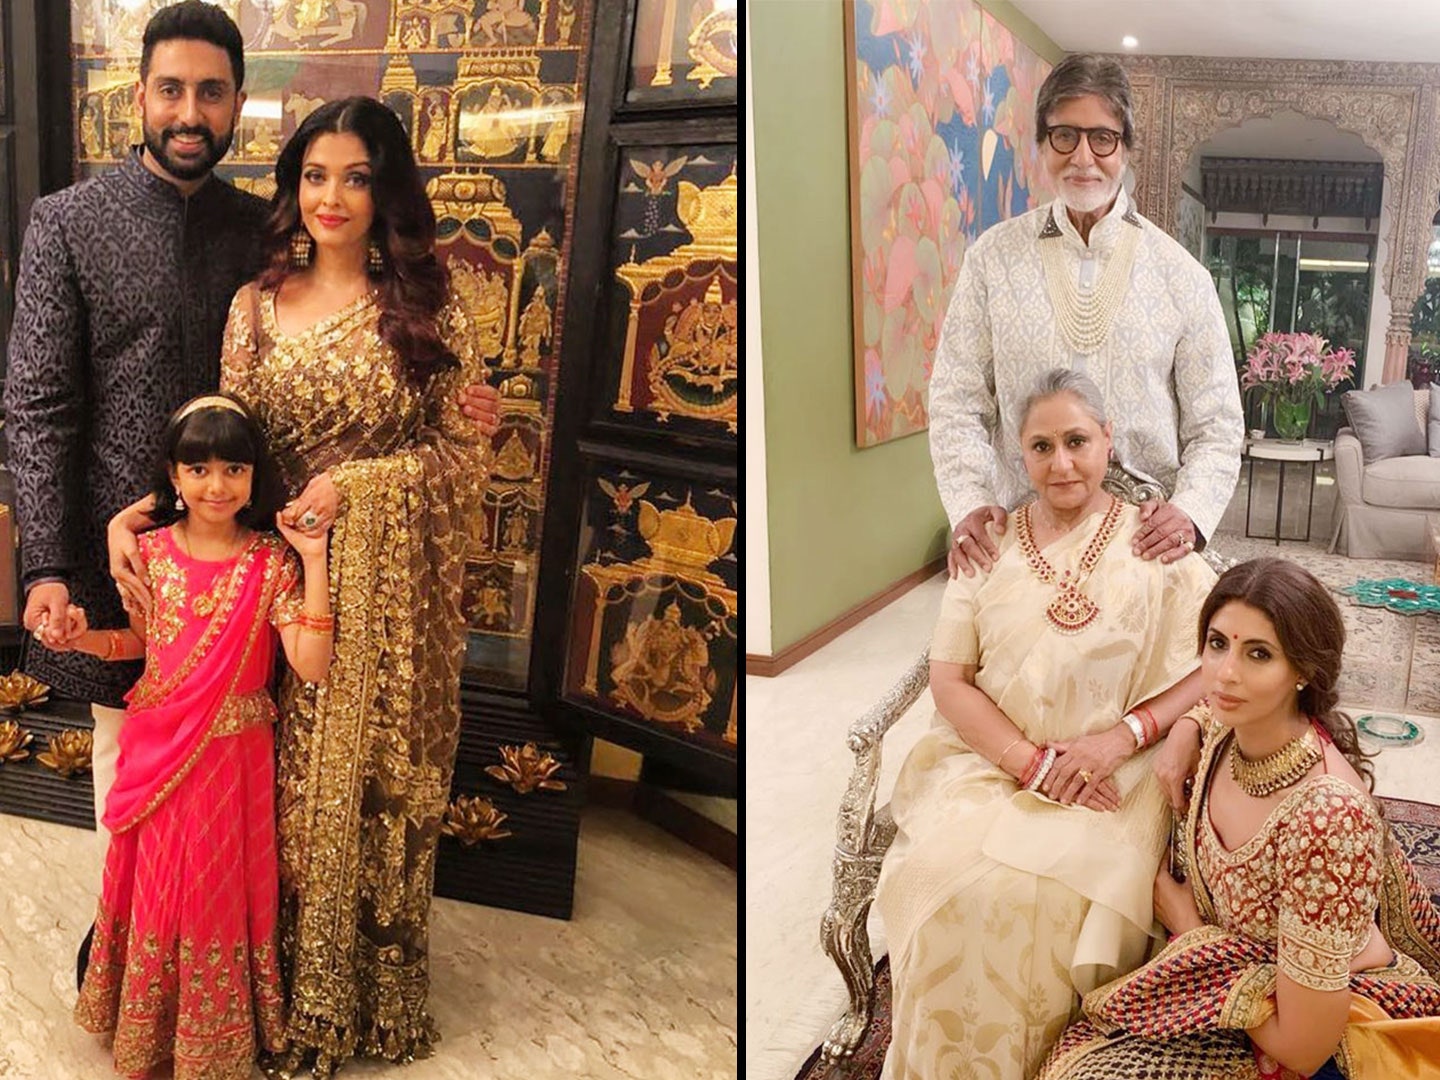 Aishwarya Rai is a daughter-in-law in the eyes of Jaya Bachchan, herself revealed